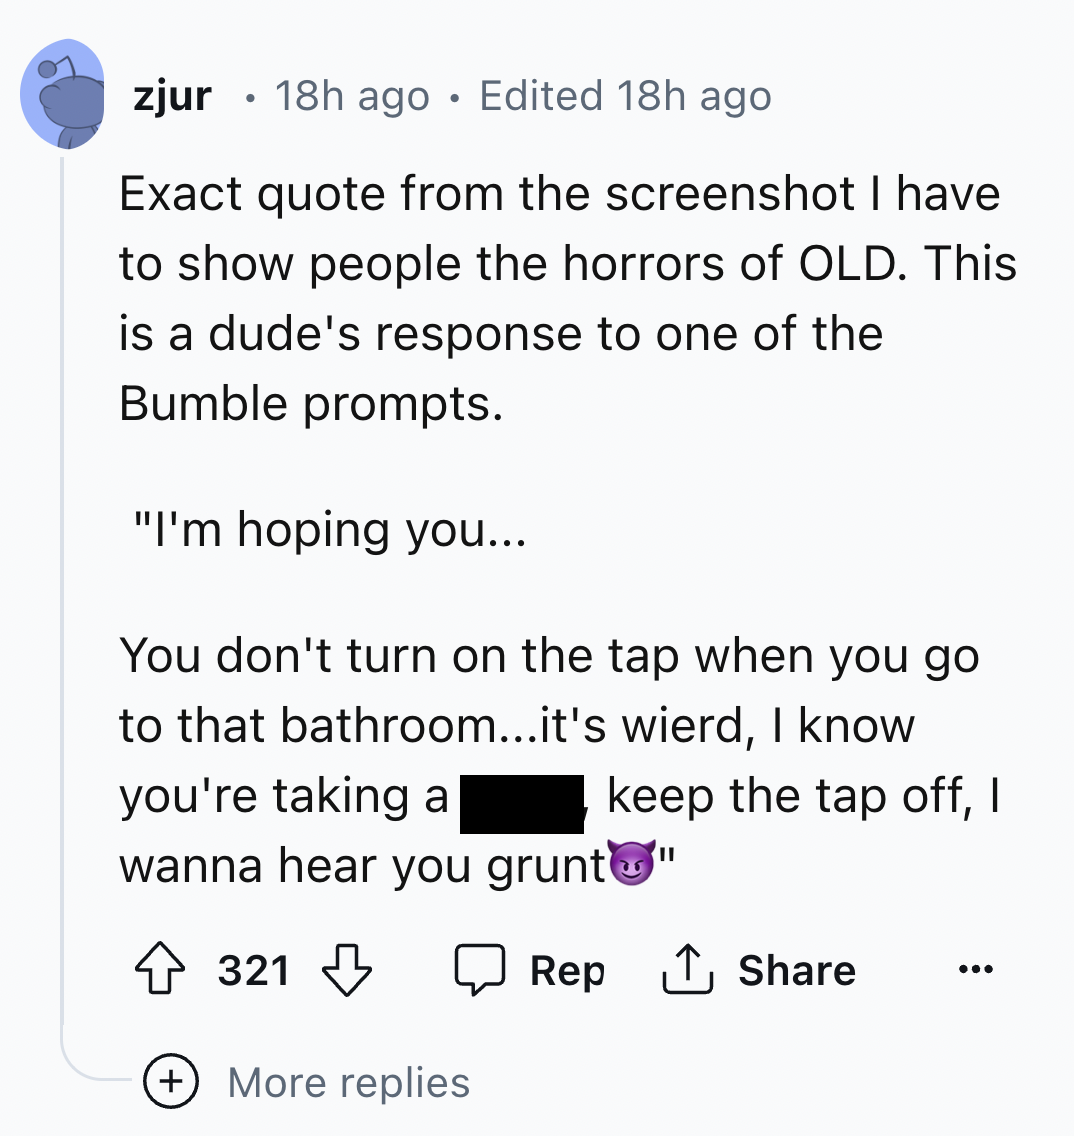 screenshot - zjur 18h ago Edited 18h ago Exact quote from the screenshot I have to show people the horrors of Old. This is a dude's response to one of the Bumble prompts. "I'm hoping you... You don't turn on the tap when you go to that bathroom...it's wie